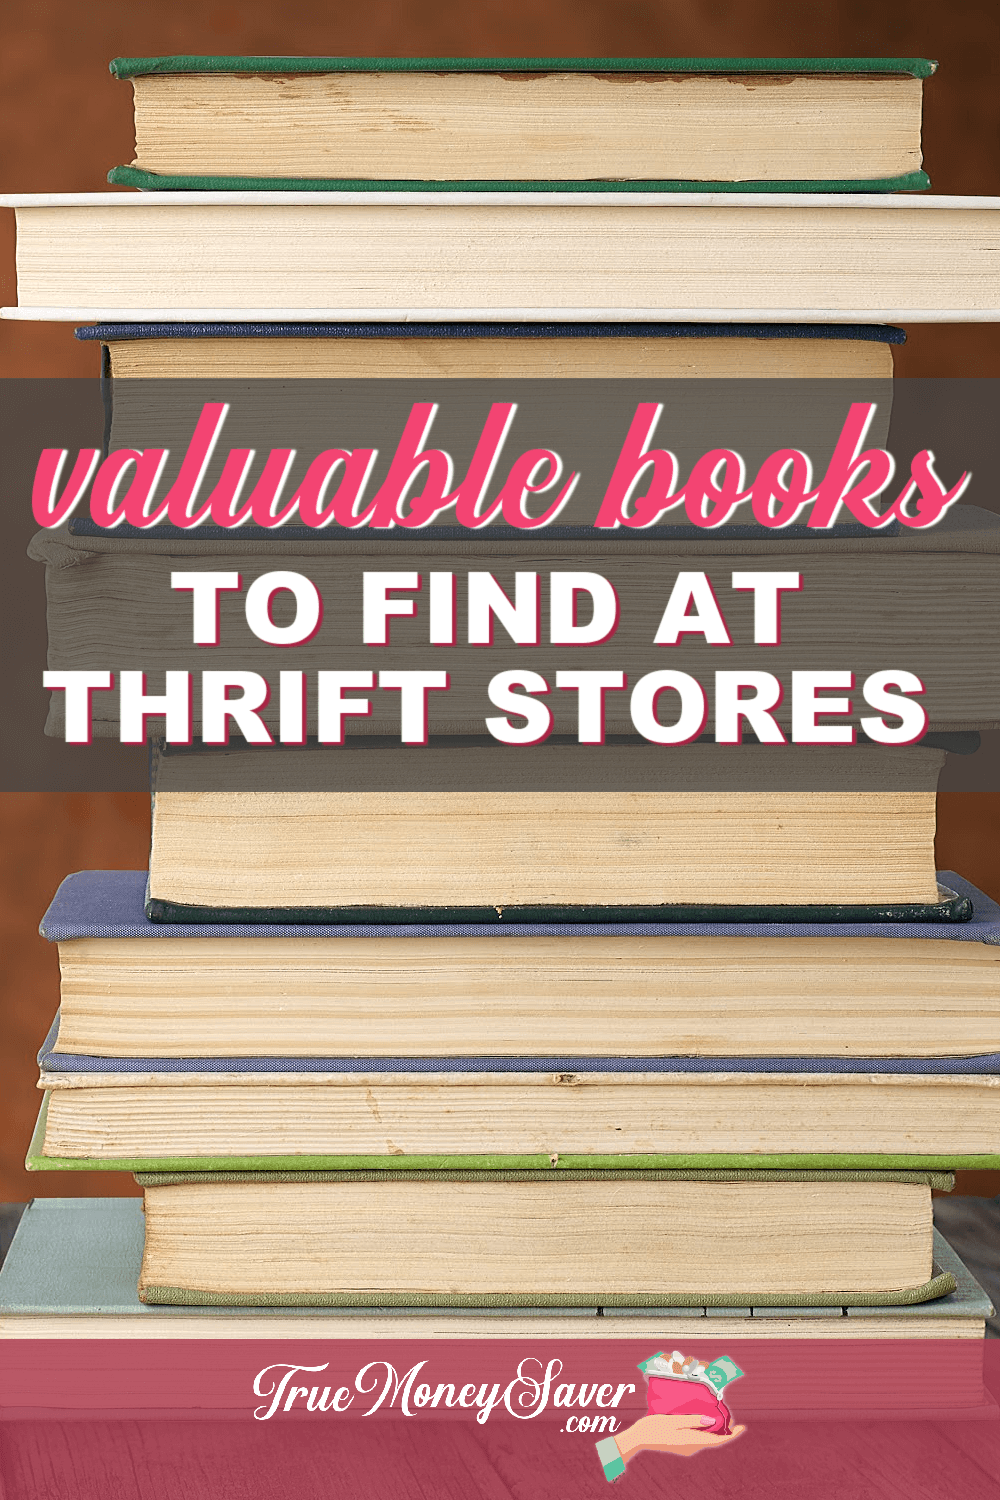 Hidden Gems in Plain Sight: The Most Valuable Books to Look for at Thrift Stores